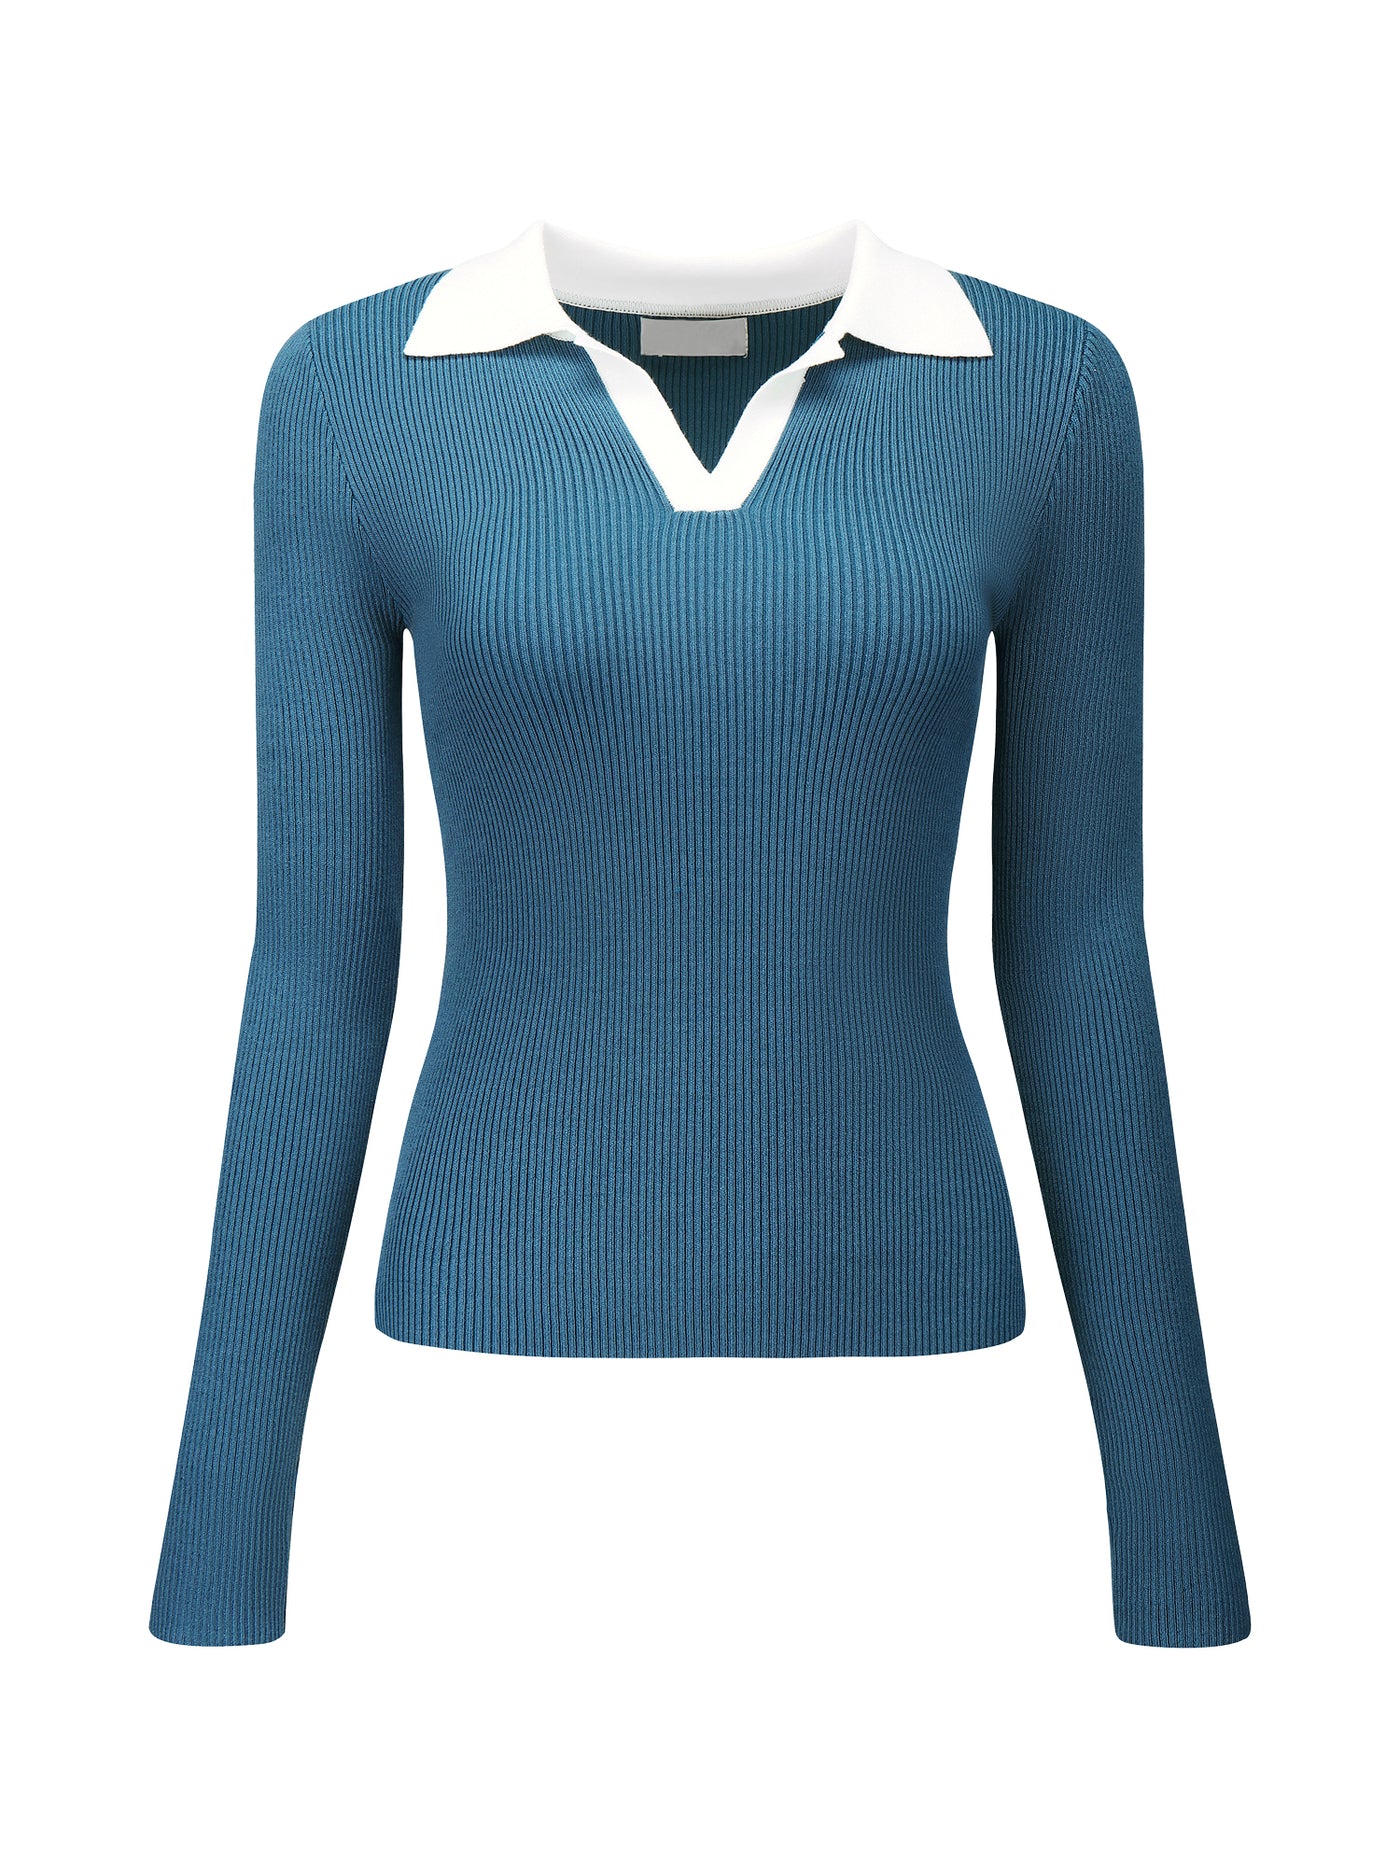 Bublédon Women's Fitted Knit Top V Neck Contrast Color Long Sleeve Polo Sweater Tops